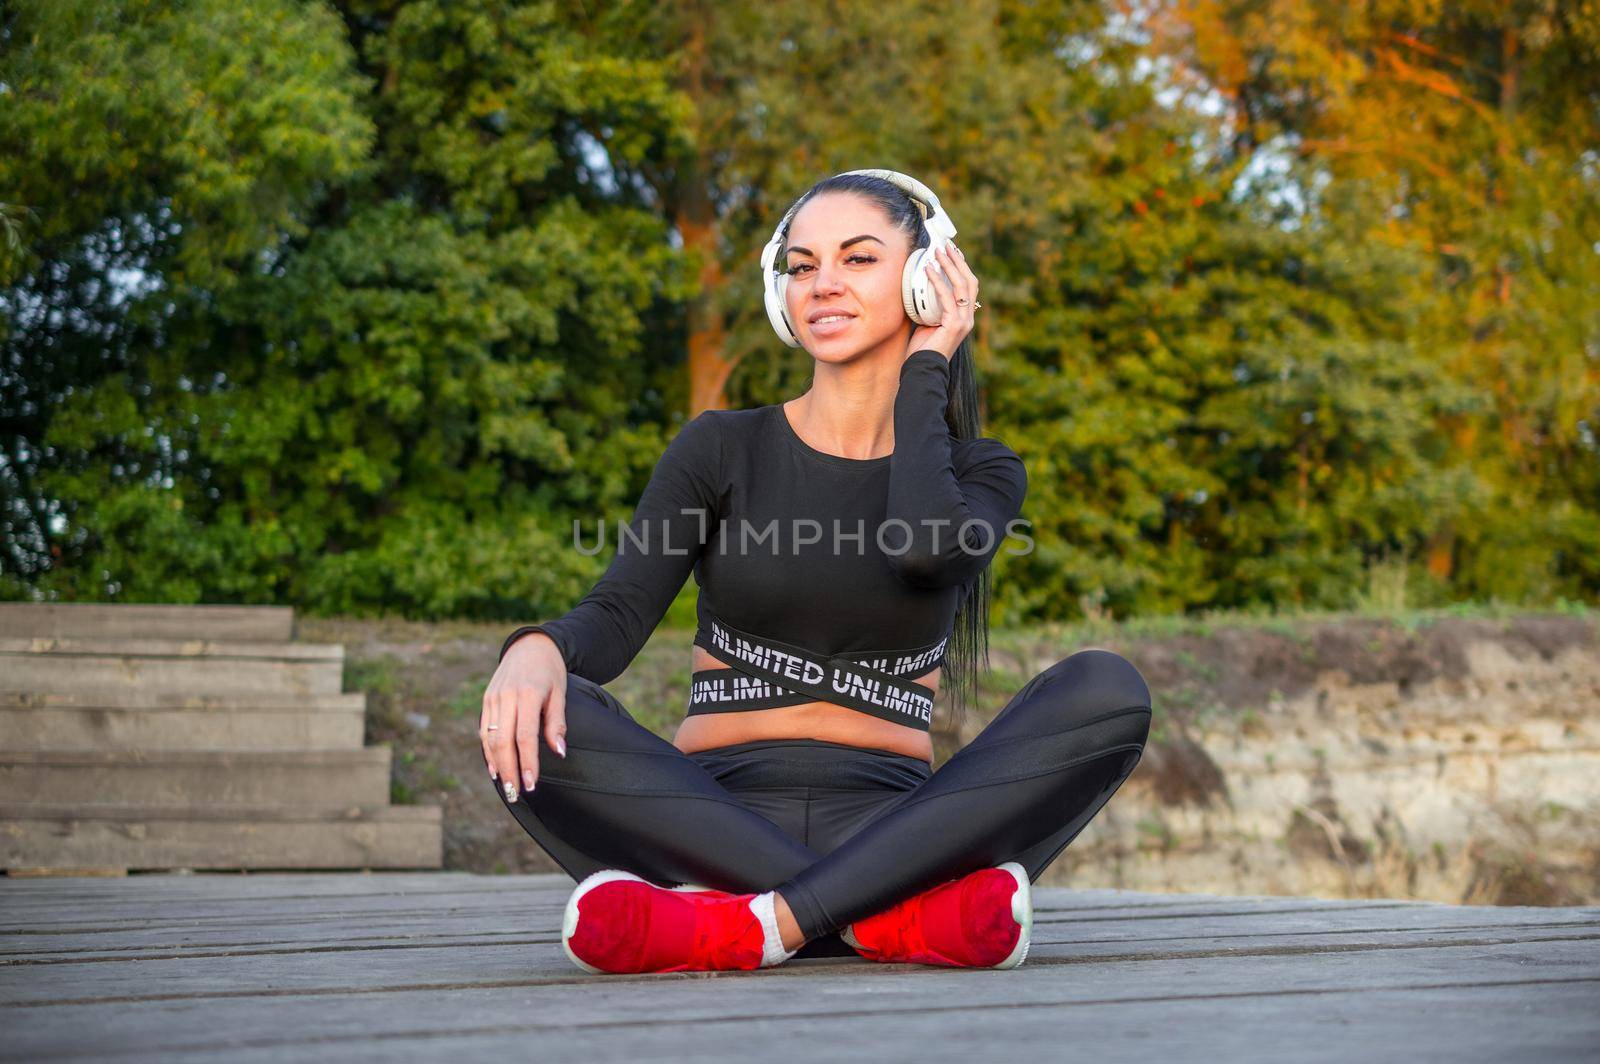 Fitness model with headphones by Proff